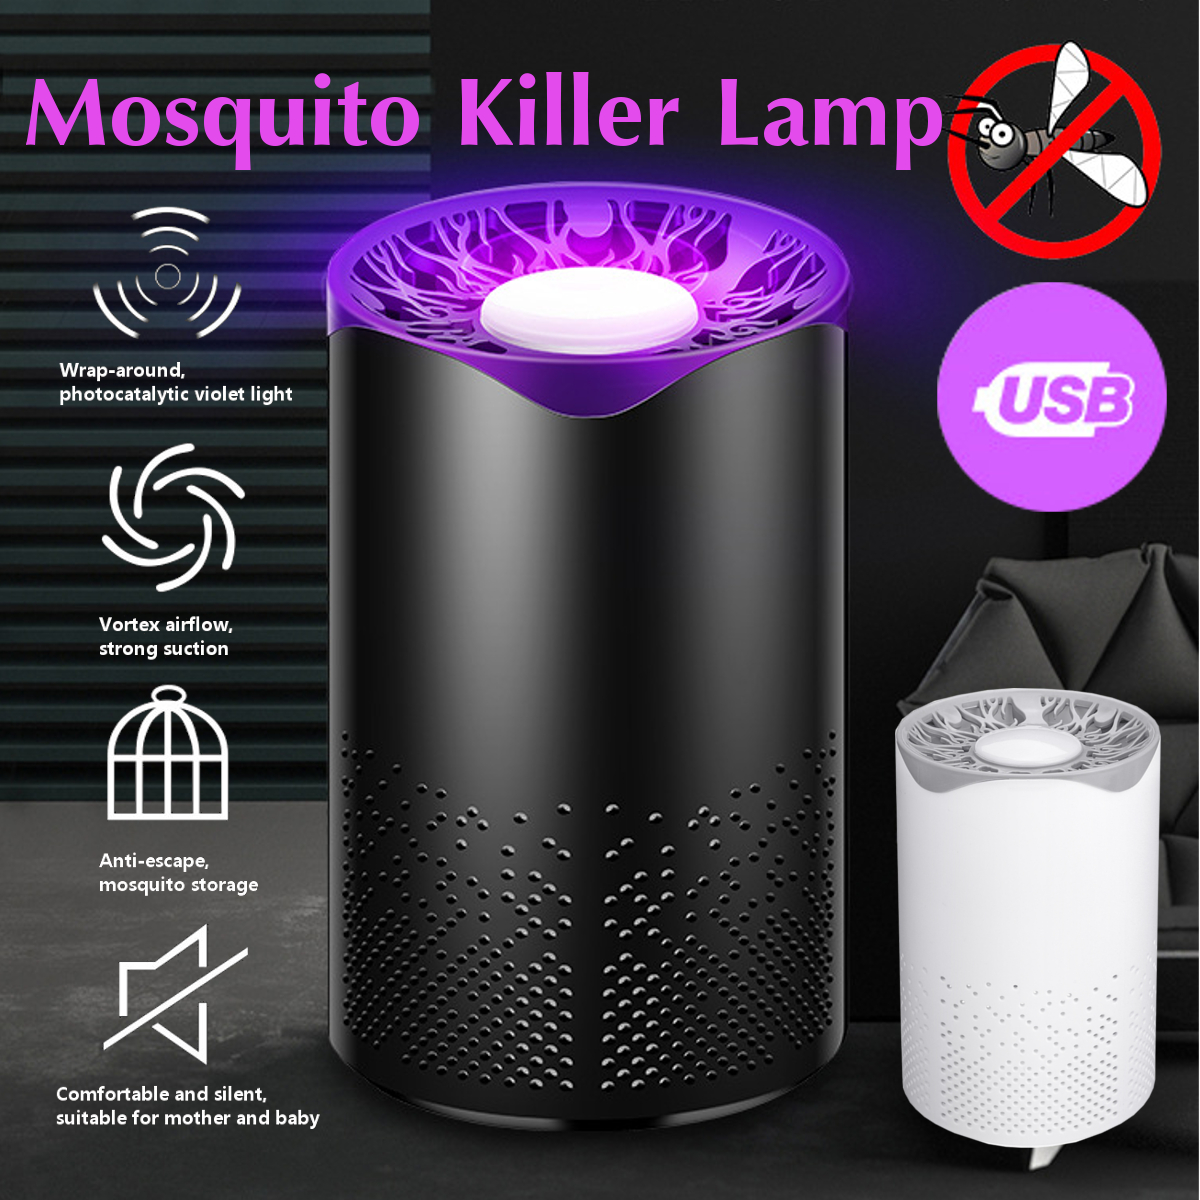 Photocatalytic-Mosquito-Insect-Killer-Lamp-USB-LED-Fly-Insect-Zapper-Trap-Light-Pest-Control-Repelle-1684093-2